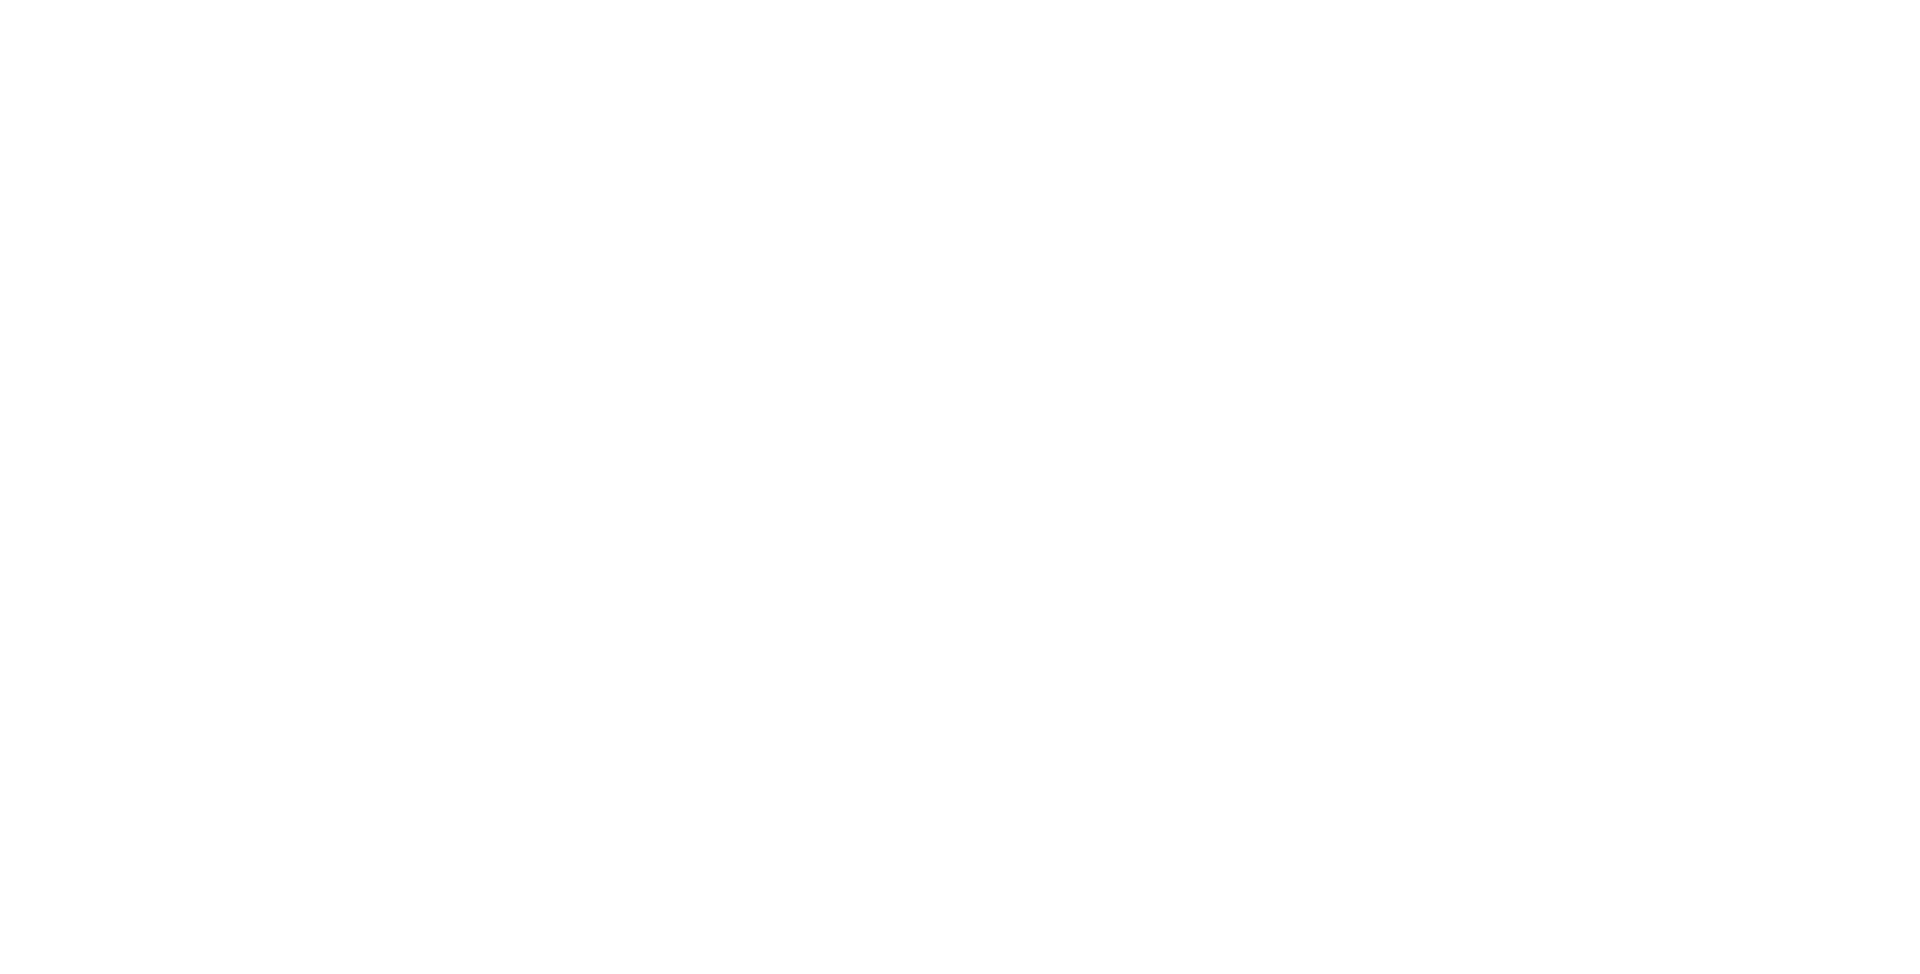 Chase_The_Sun-WIT_TRANSPARANT